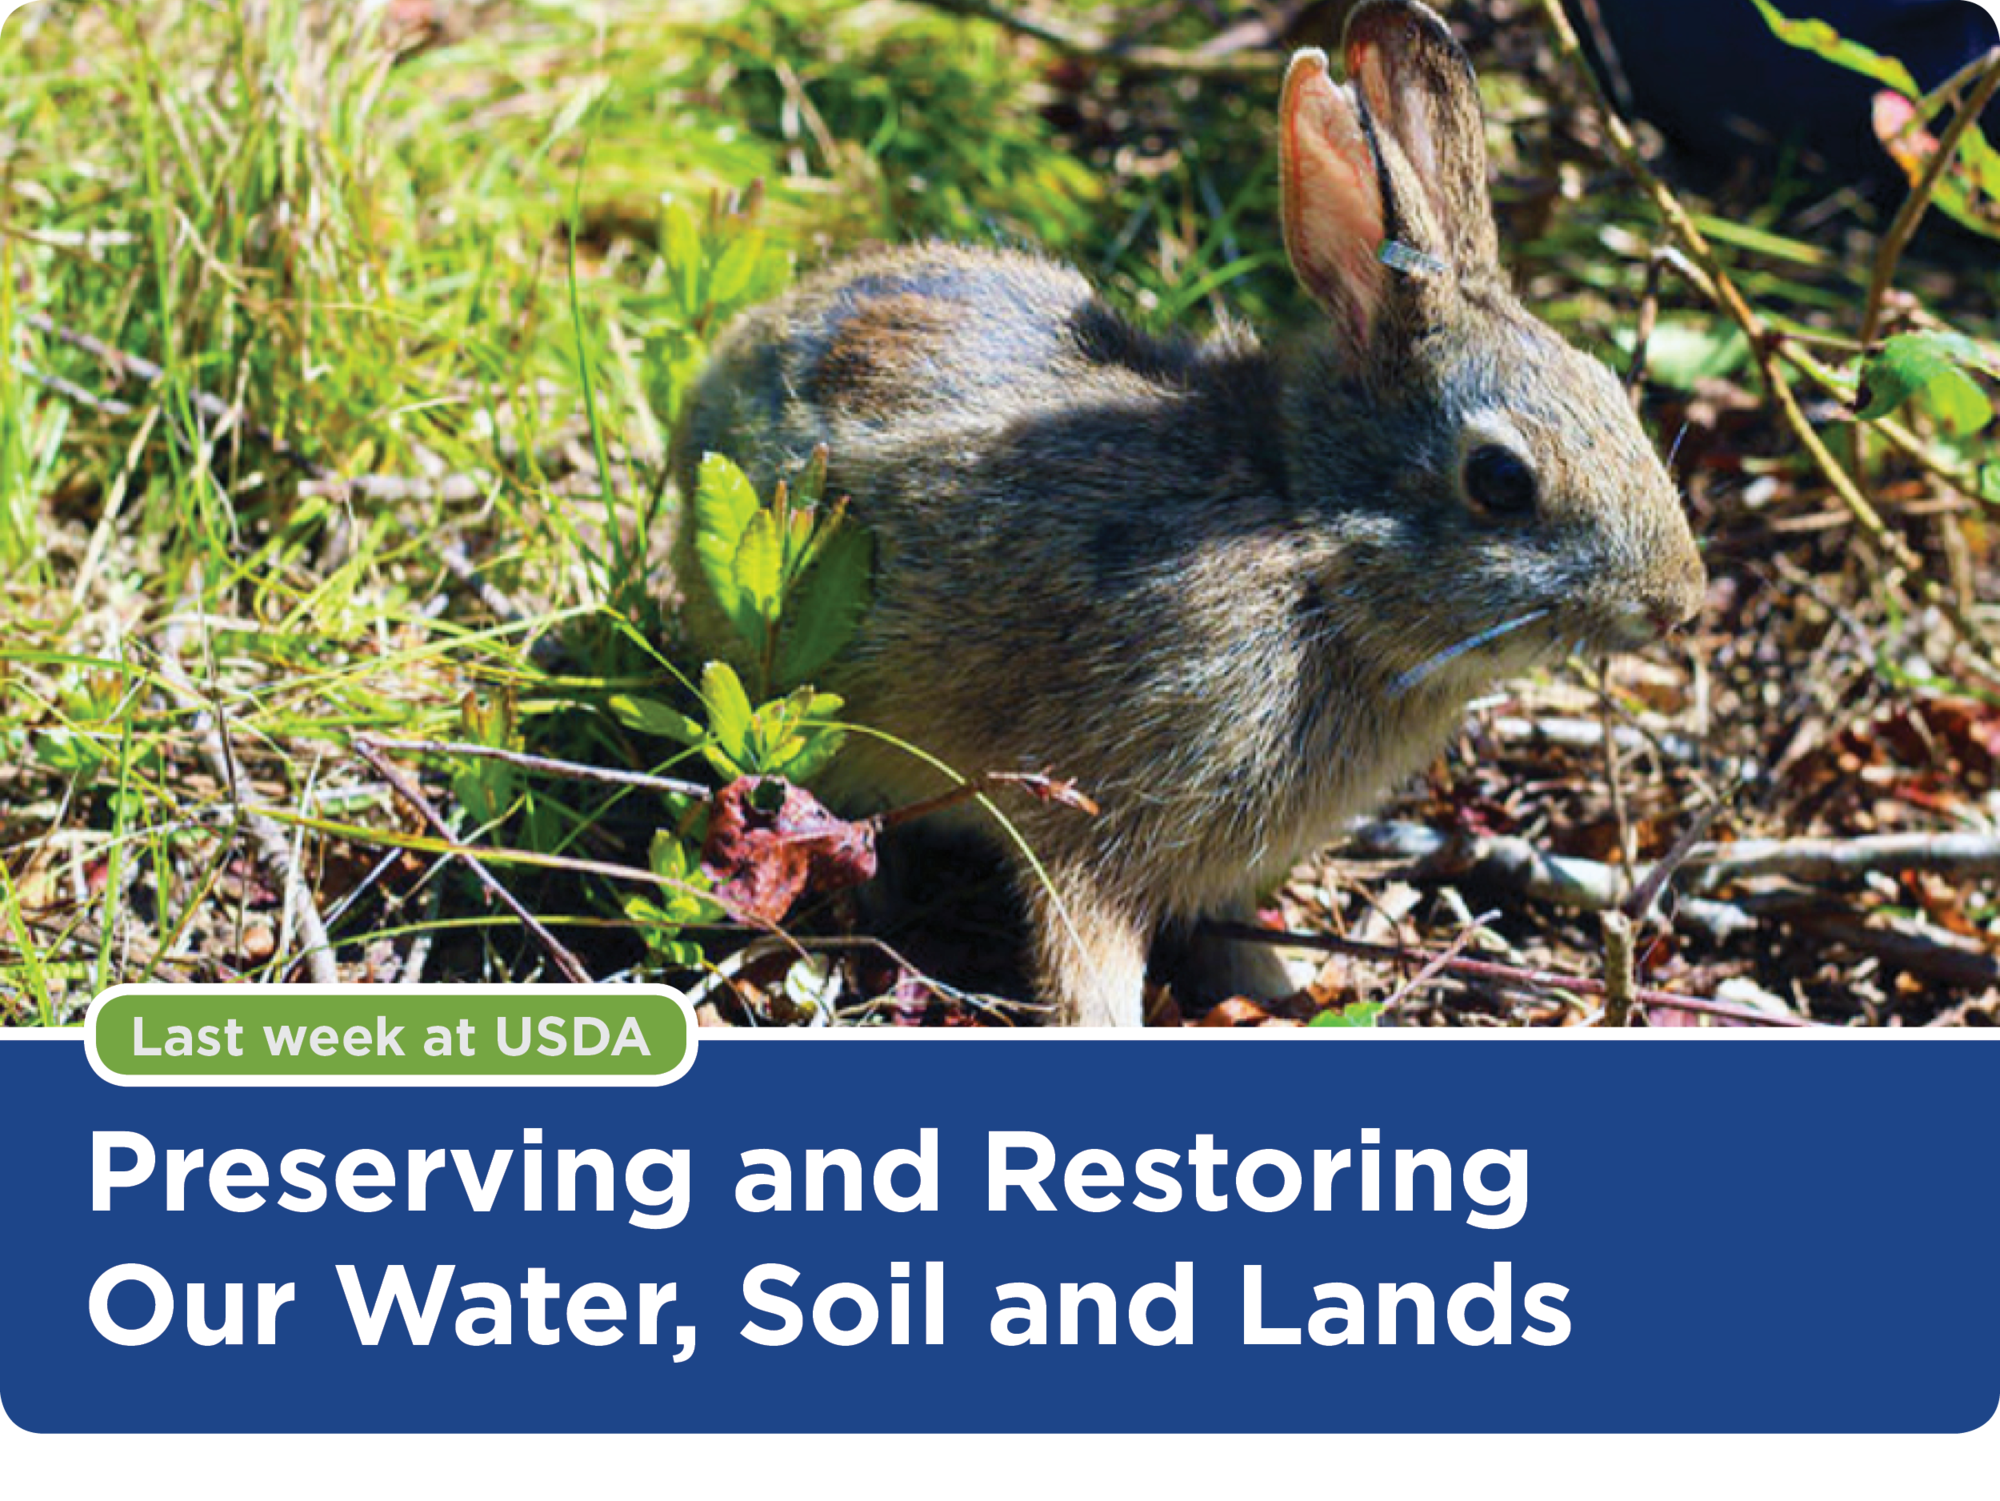 Preserving and Restoring Our Water, Soil and Lands